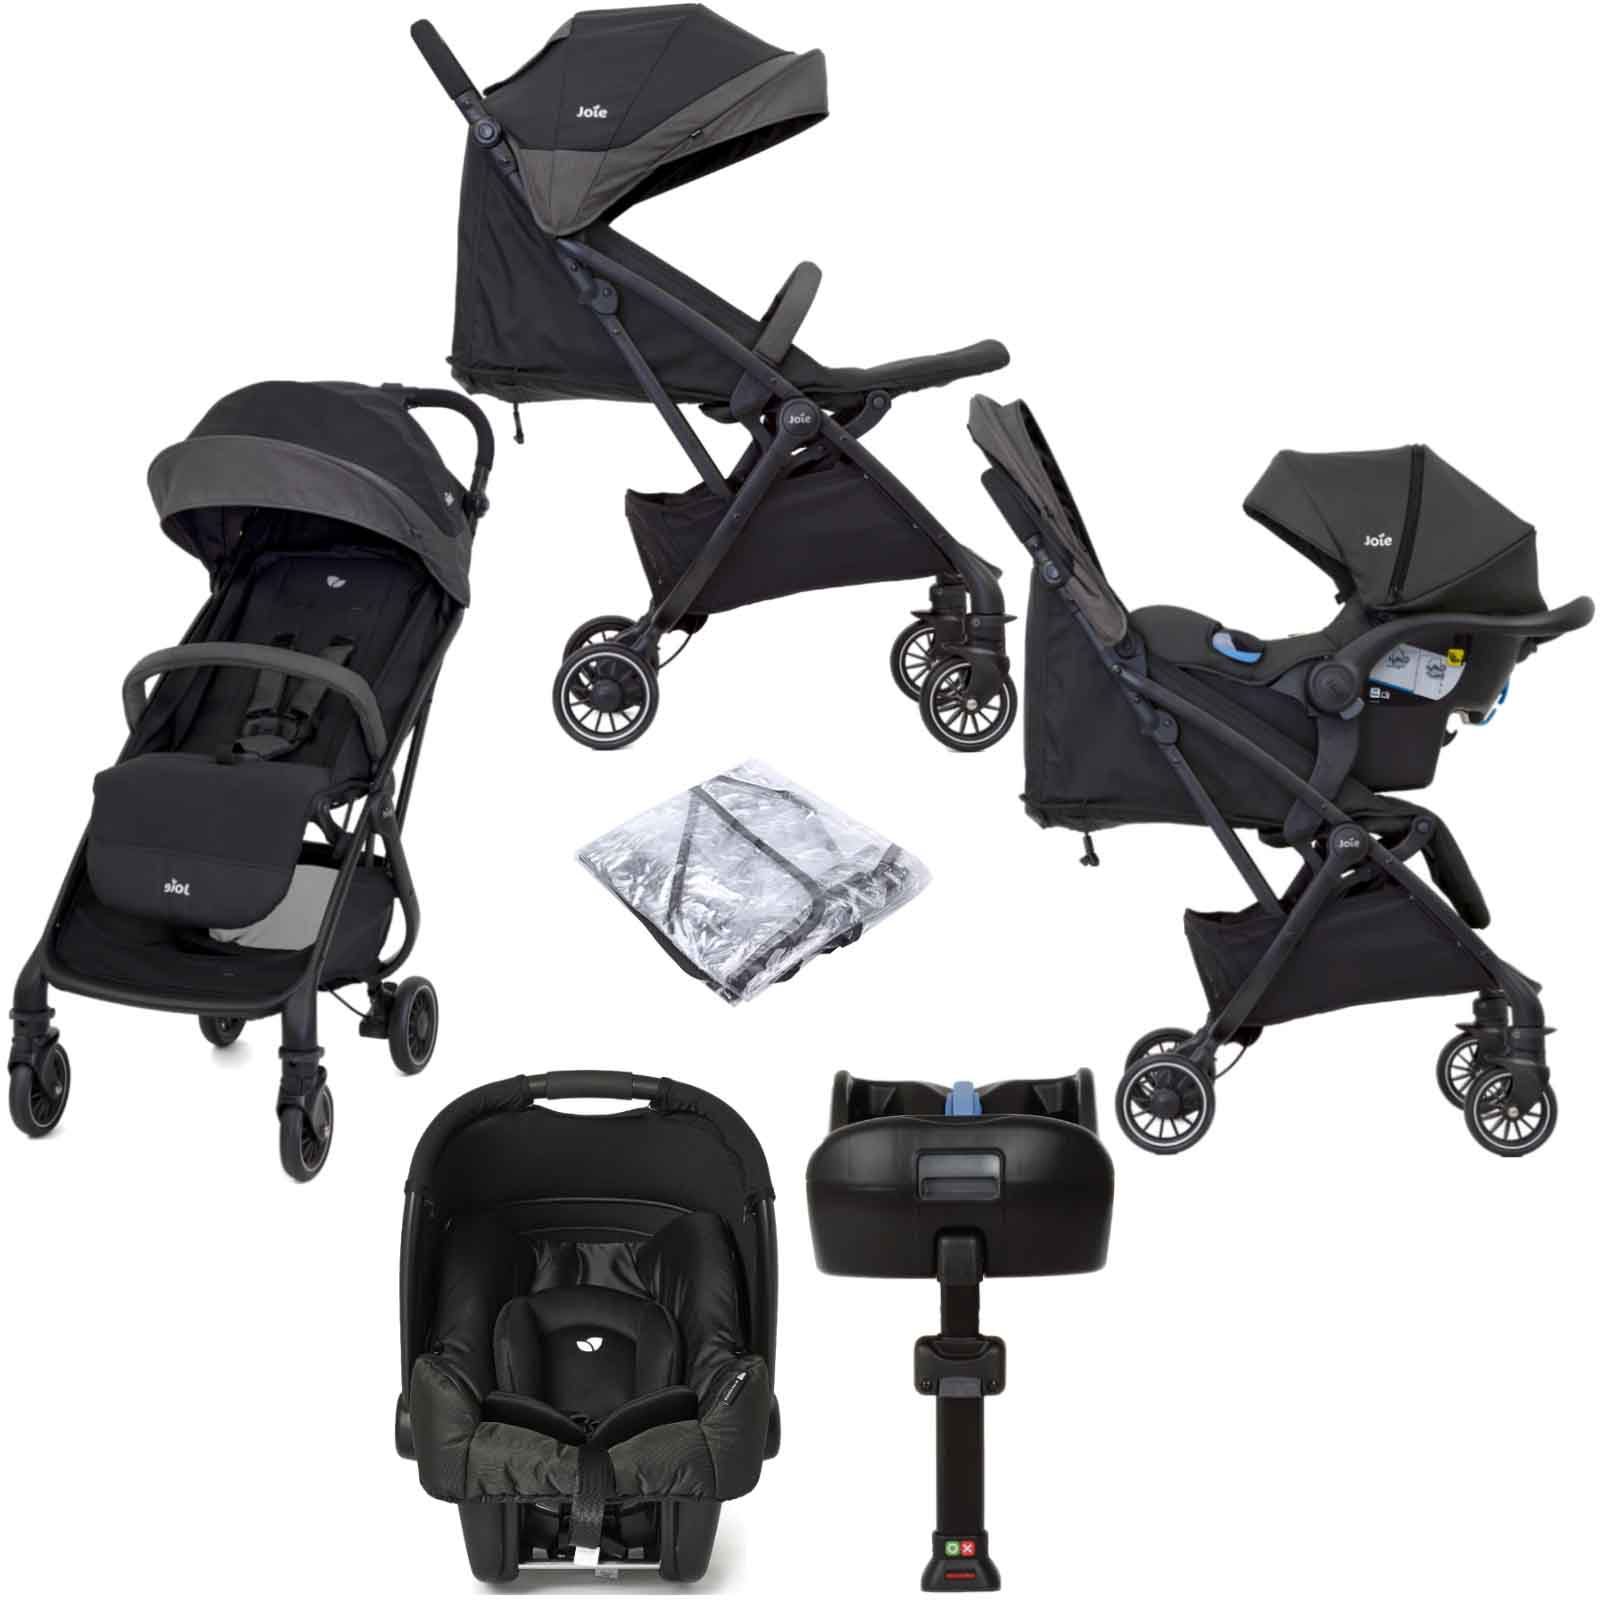 mothercare joie double buggy